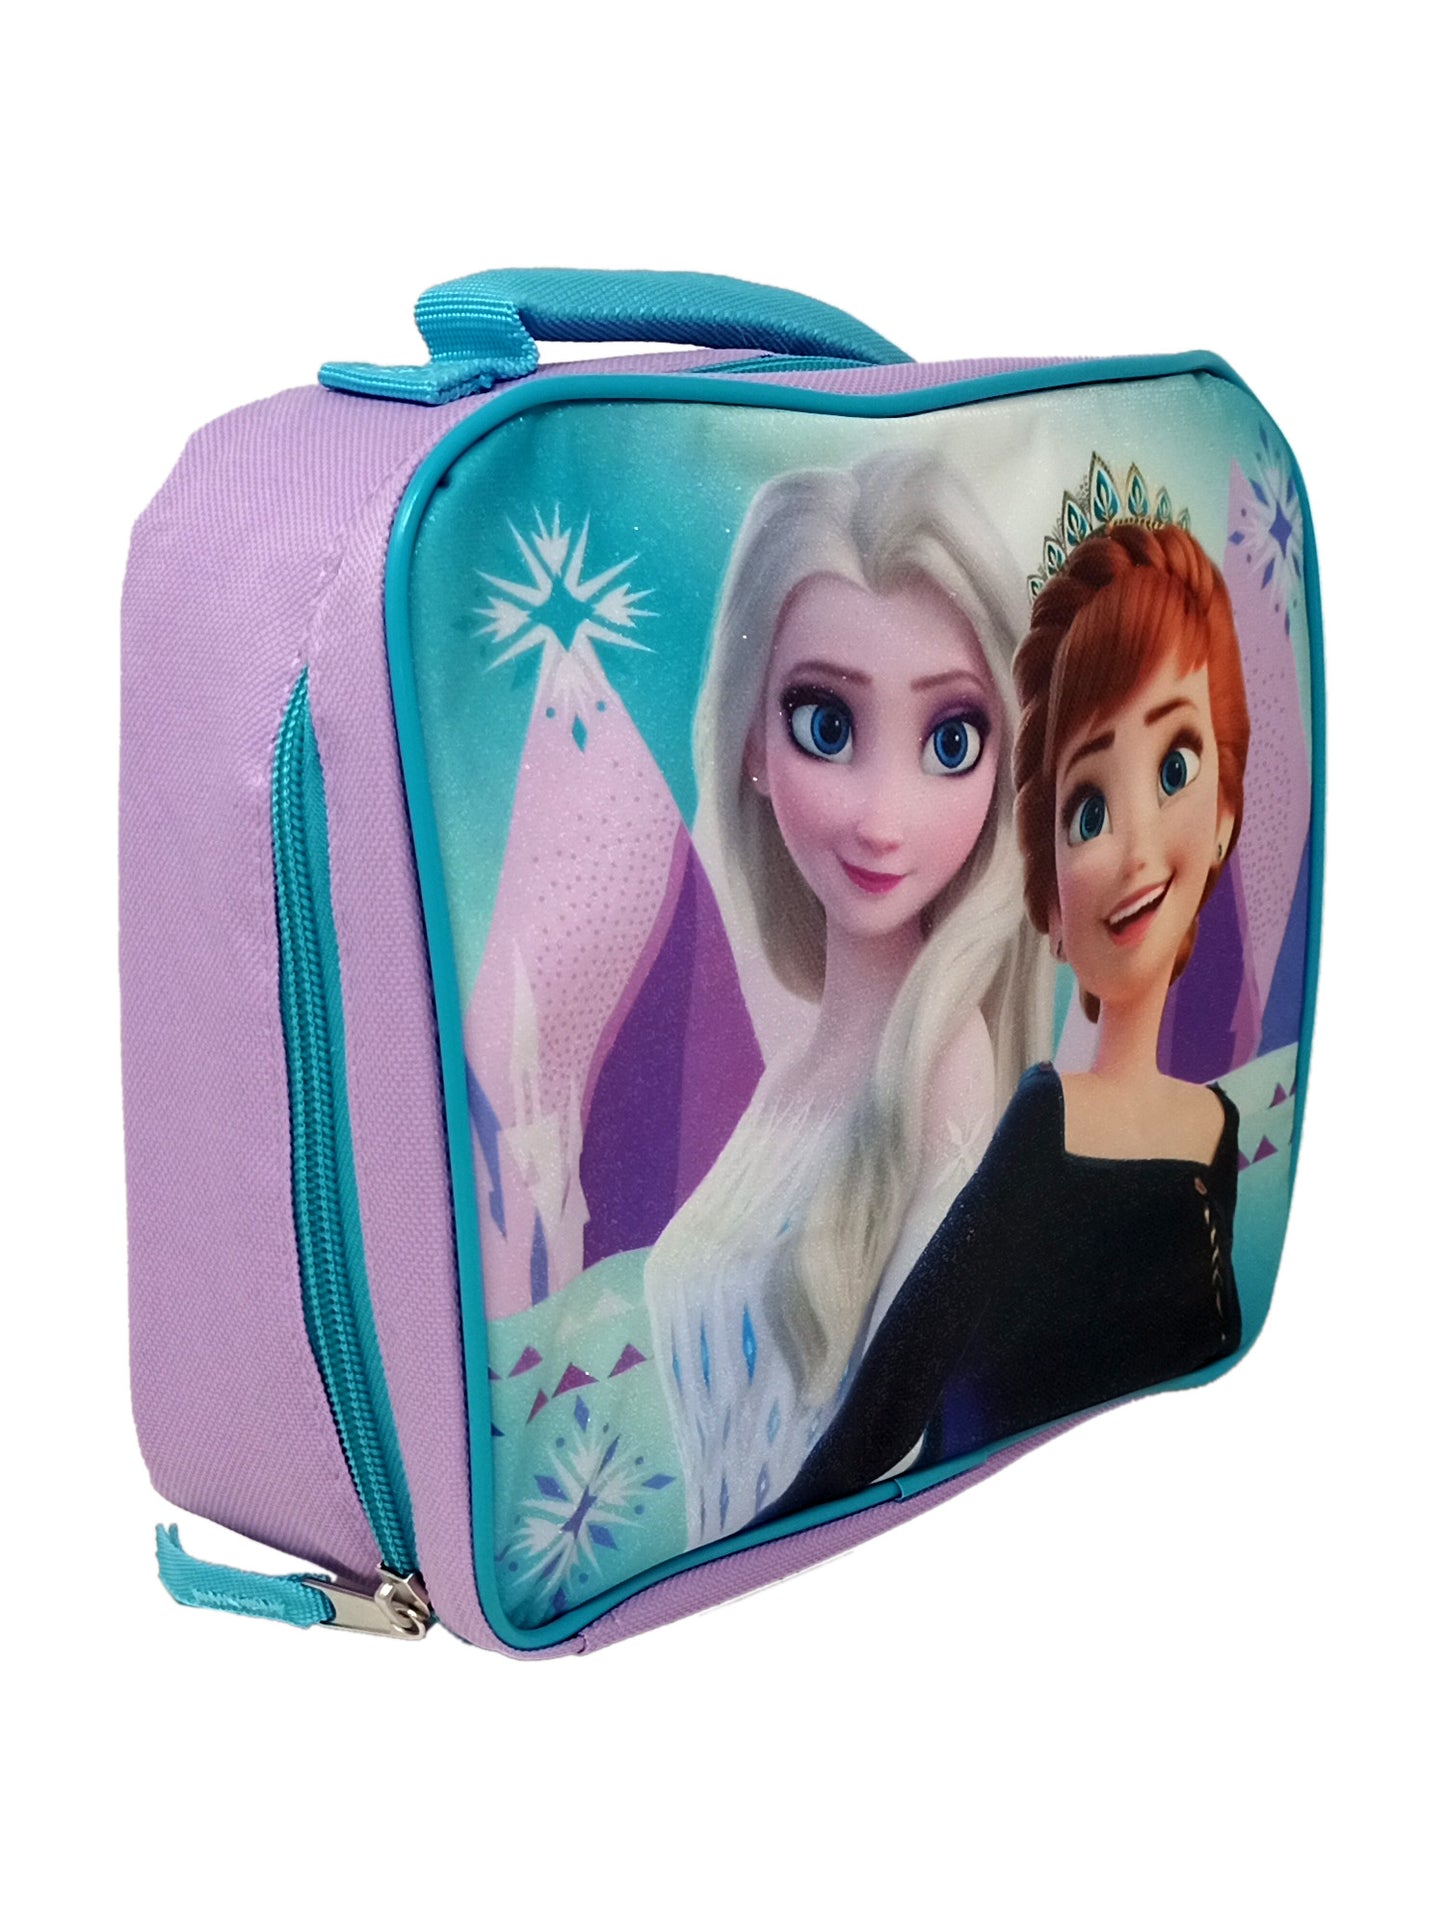 Frozen Anna & Elsa Insulated Lunch Bag Disney w/ 2-Piece Food Container Set